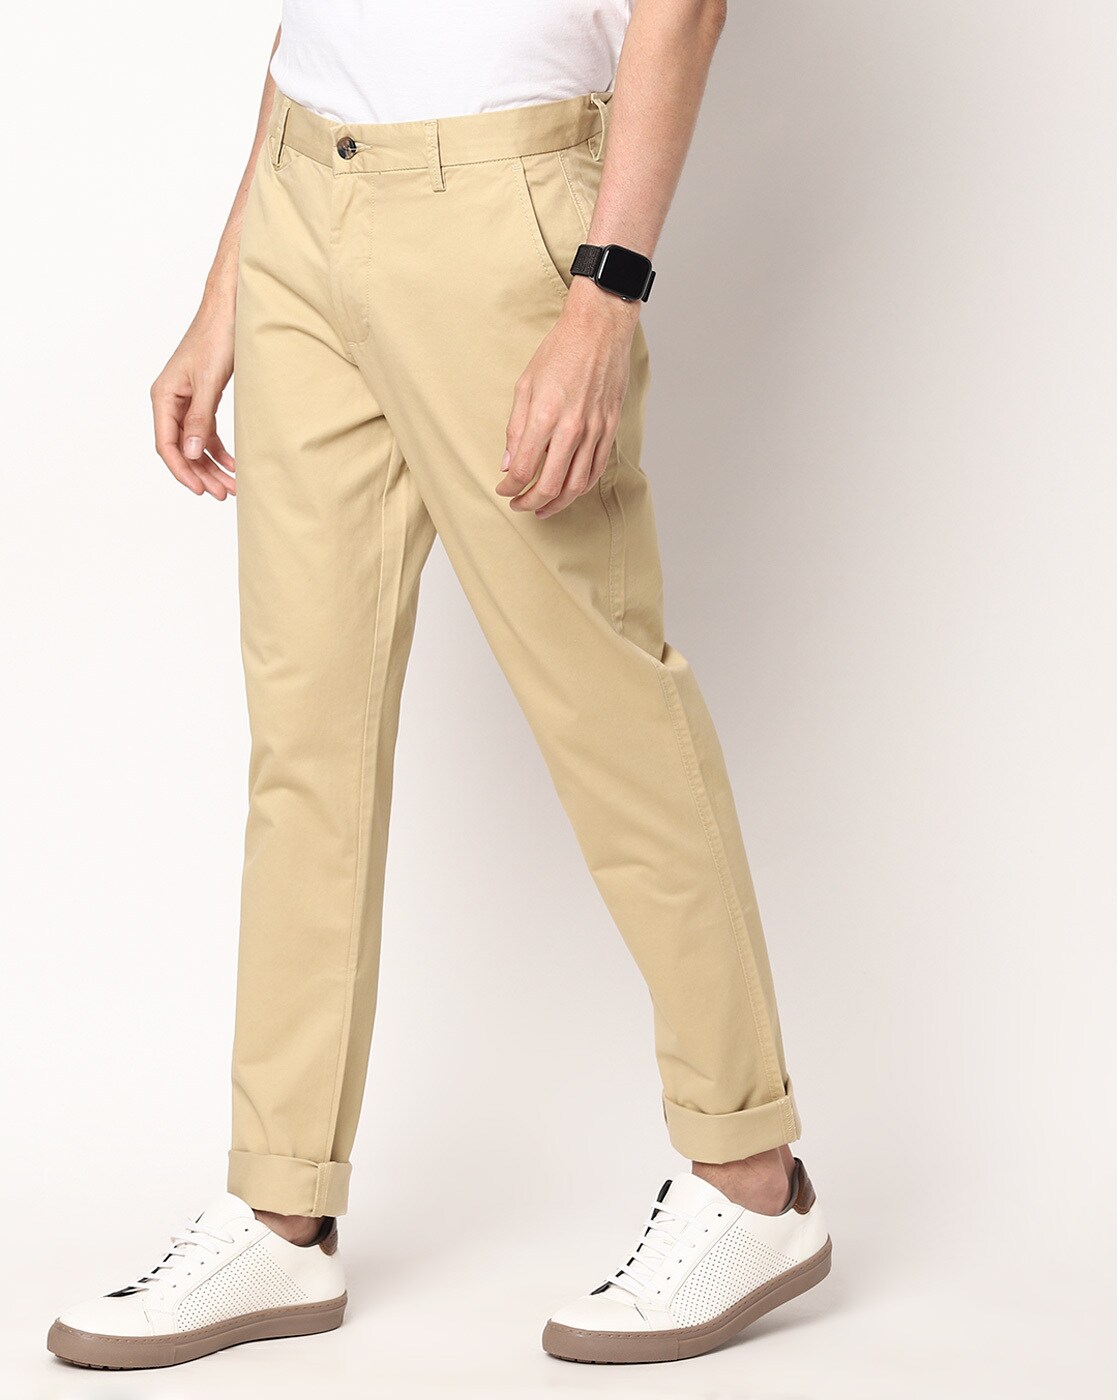 United Colors of Benetton Women's Pants, Acid Green 25b, XS : Buy Online at  Best Price in KSA - Souq is now Amazon.sa: Fashion